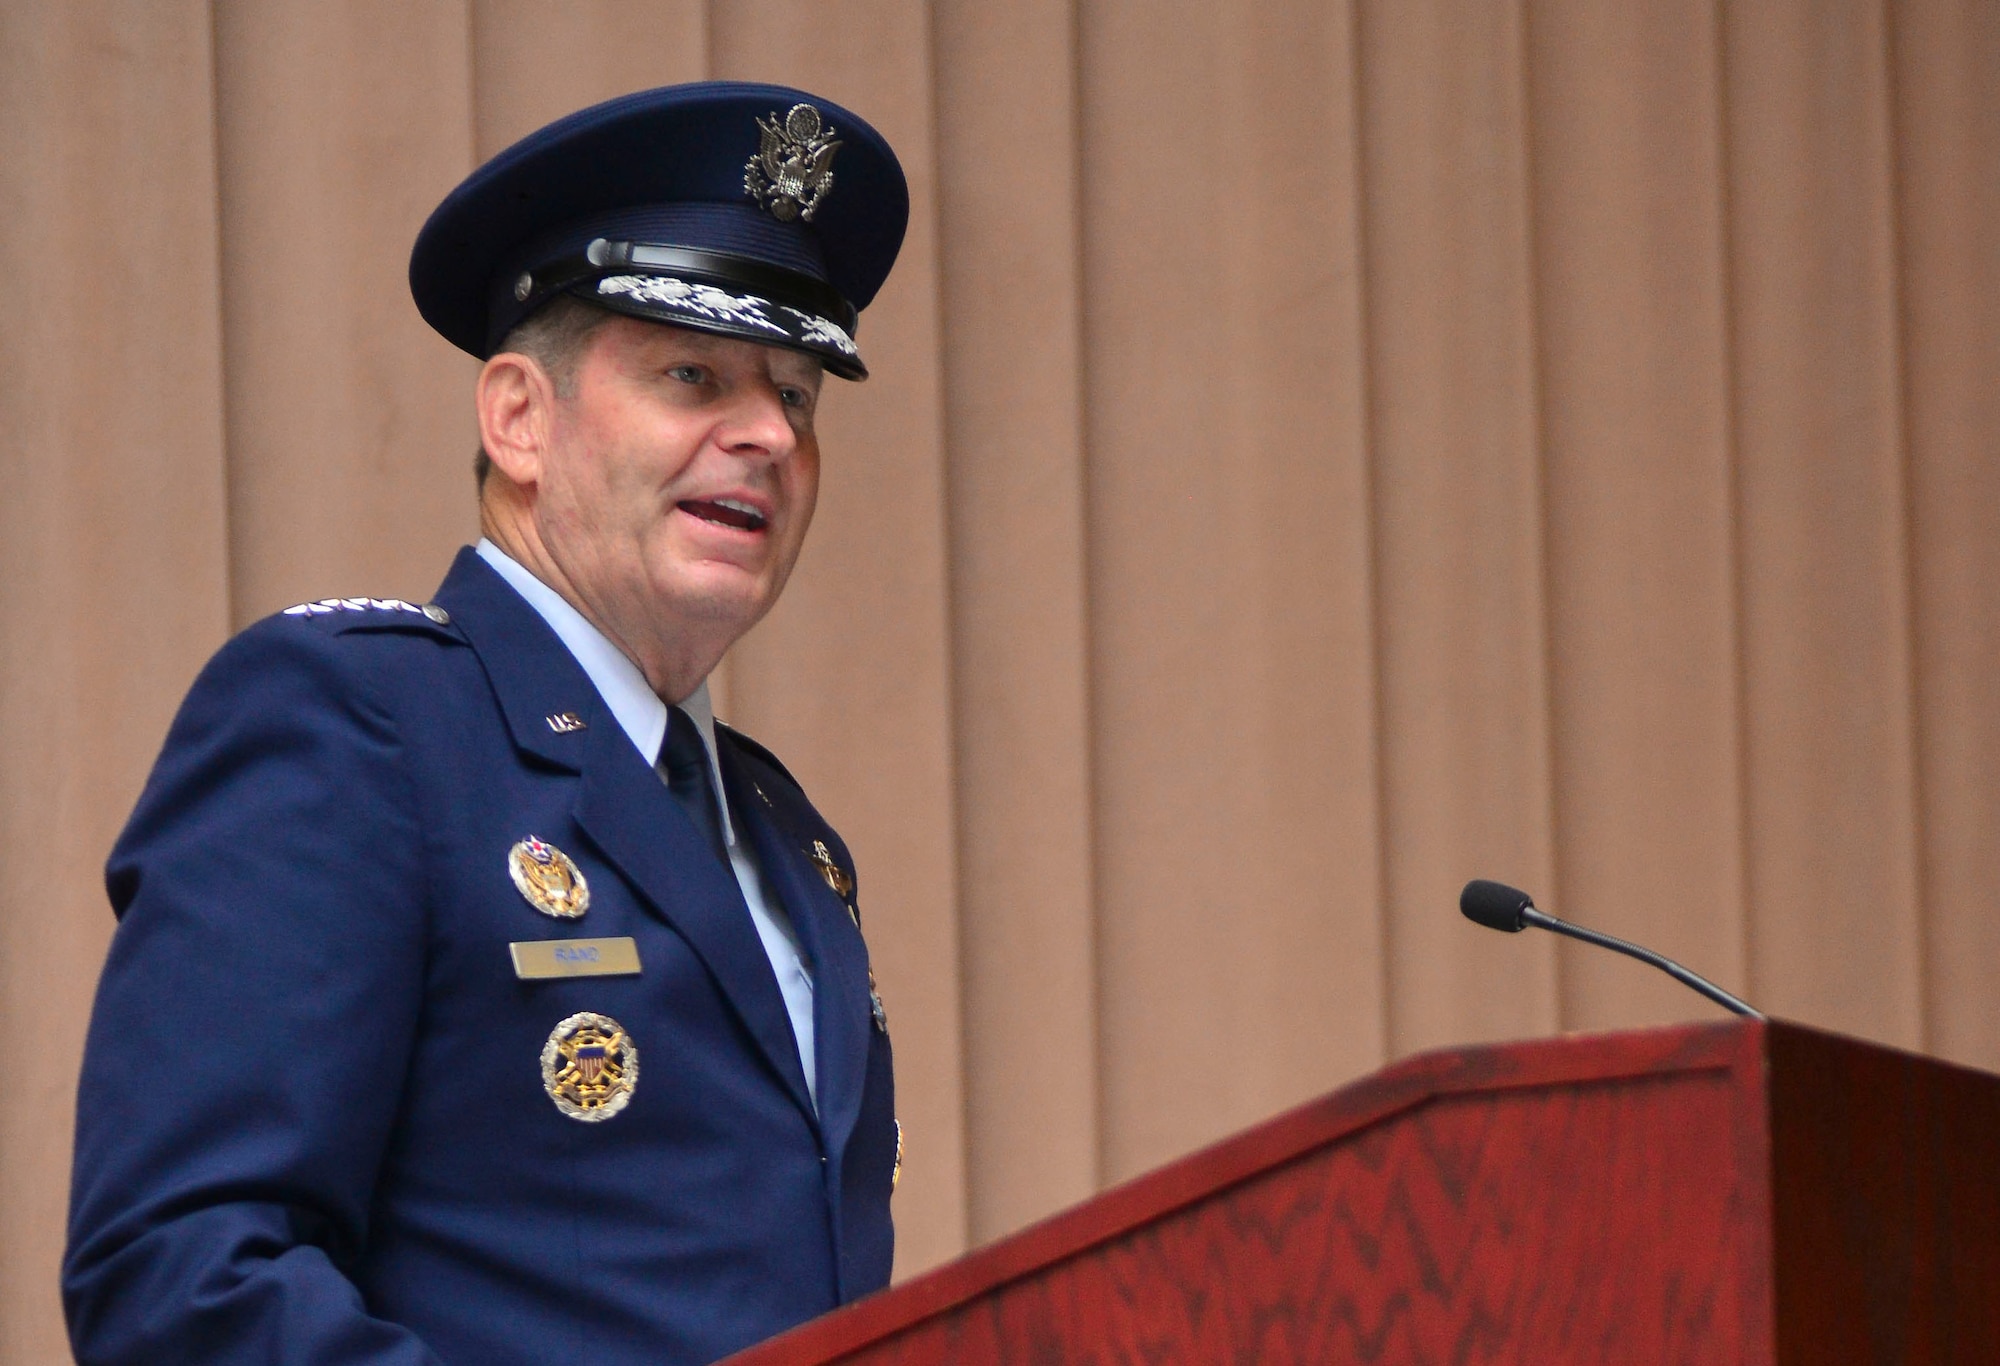 Gen. Robin Rand provides remarks after taking command of Air Force Global Strike Command during a ceremony at Barksdale Air Force Base, La., July 28, 2015. Rand said he will ensure AFGSC and its Airmen are ready to carry the nation’s load of developing and providing combat-ready forces for nuclear deterrence and conventional global strike operations. (U.S Air Force photo/Airman 1st Class Mozer O. Da Cunha)